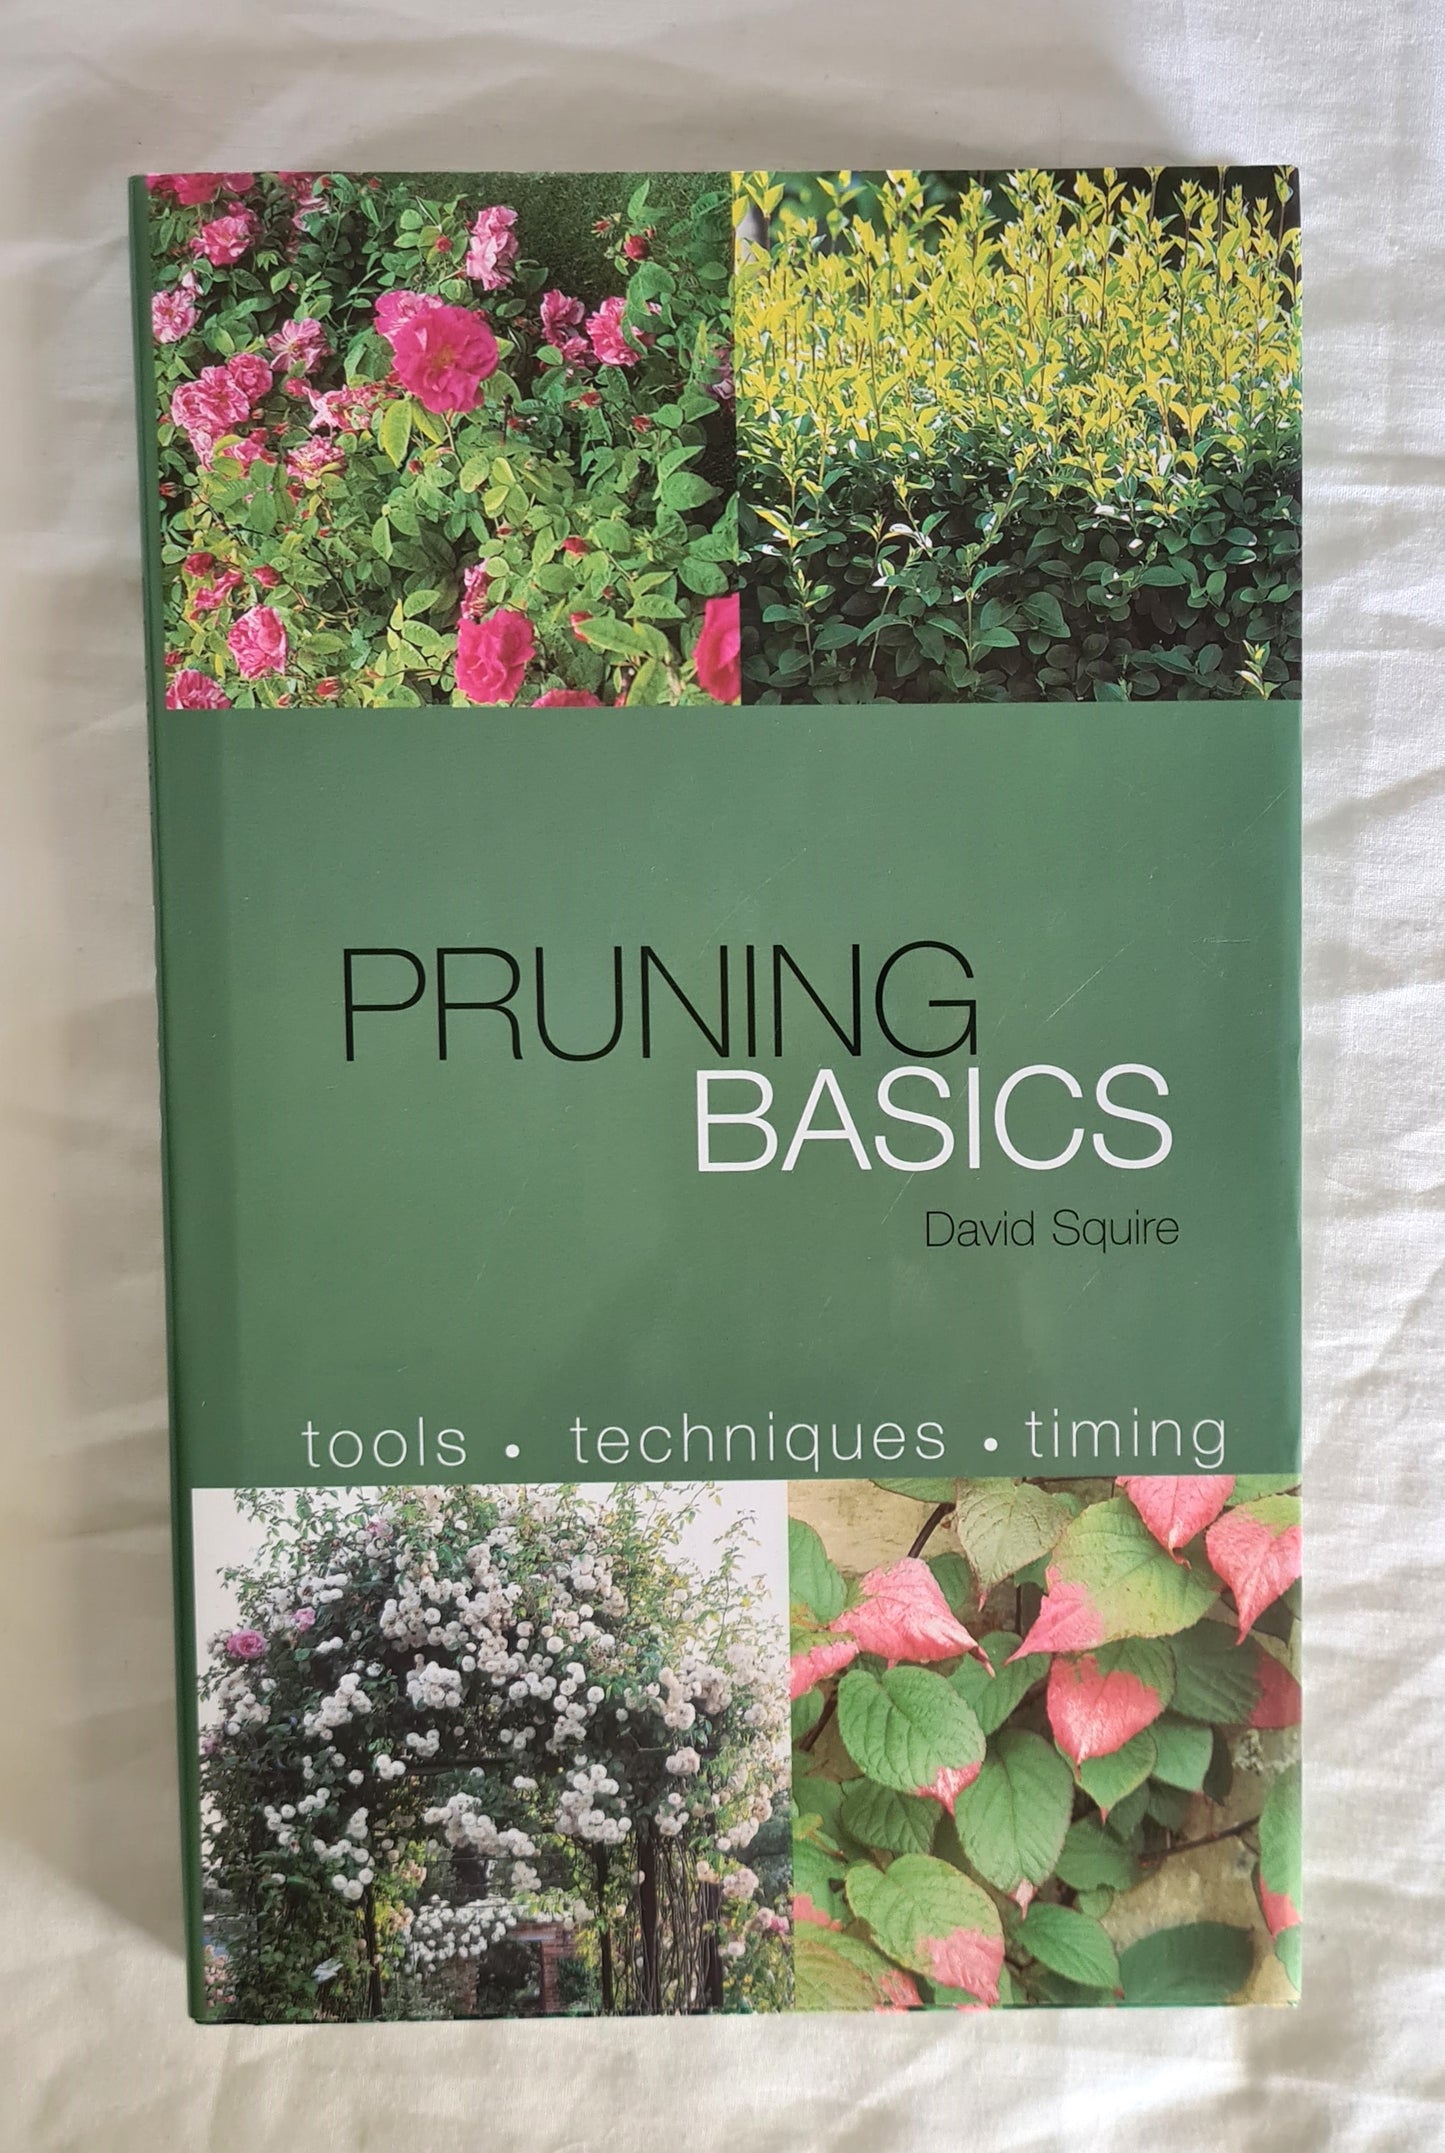 Pruning Basics  by David Squire